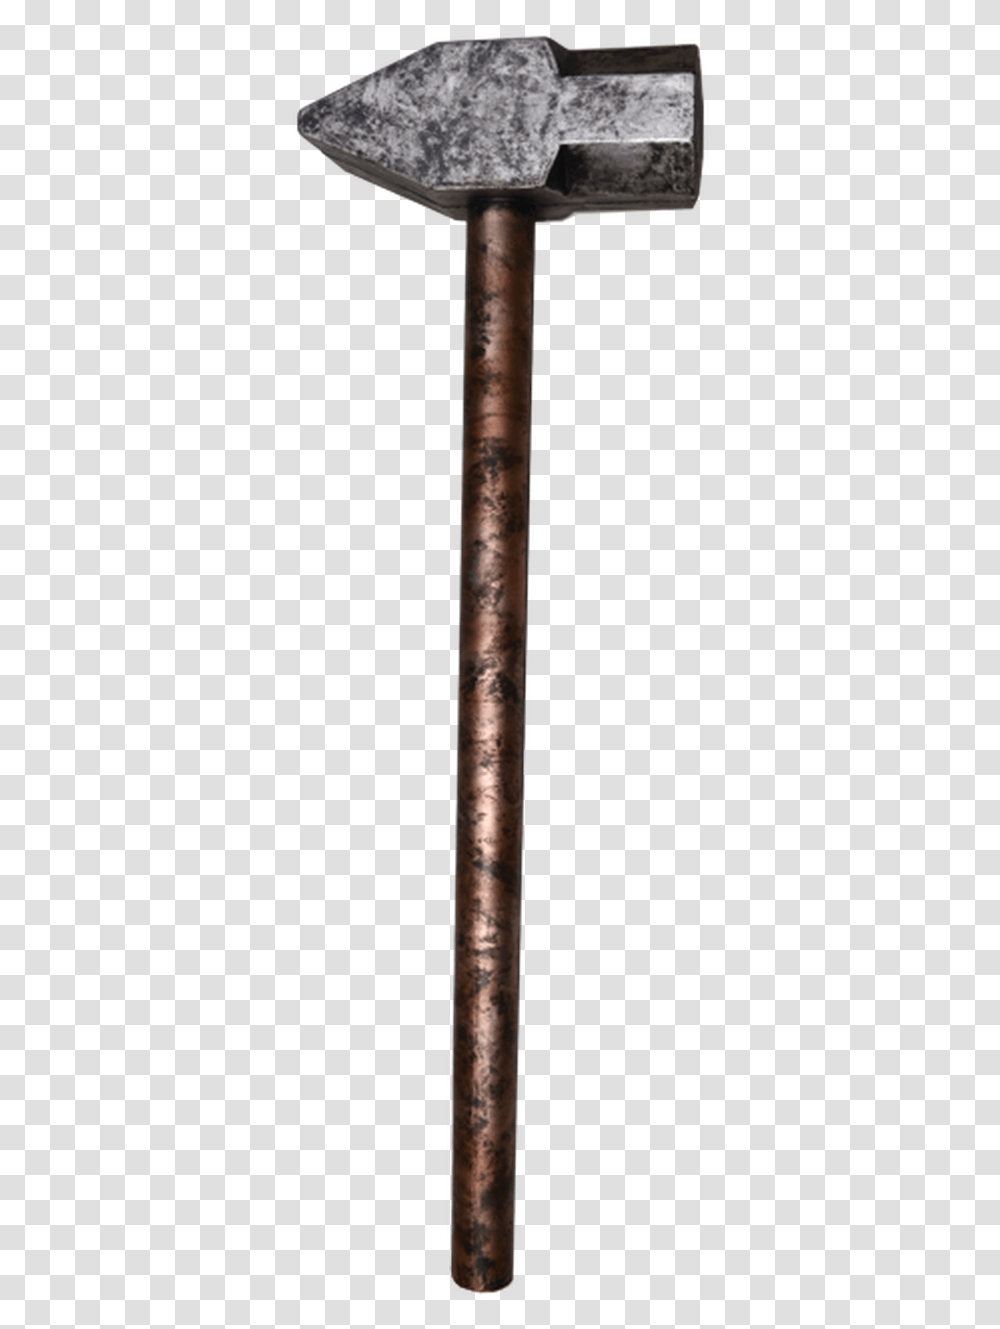 Texas Chainsaw Massacre Hammer, Tool, Arrow, Weapon Transparent Png